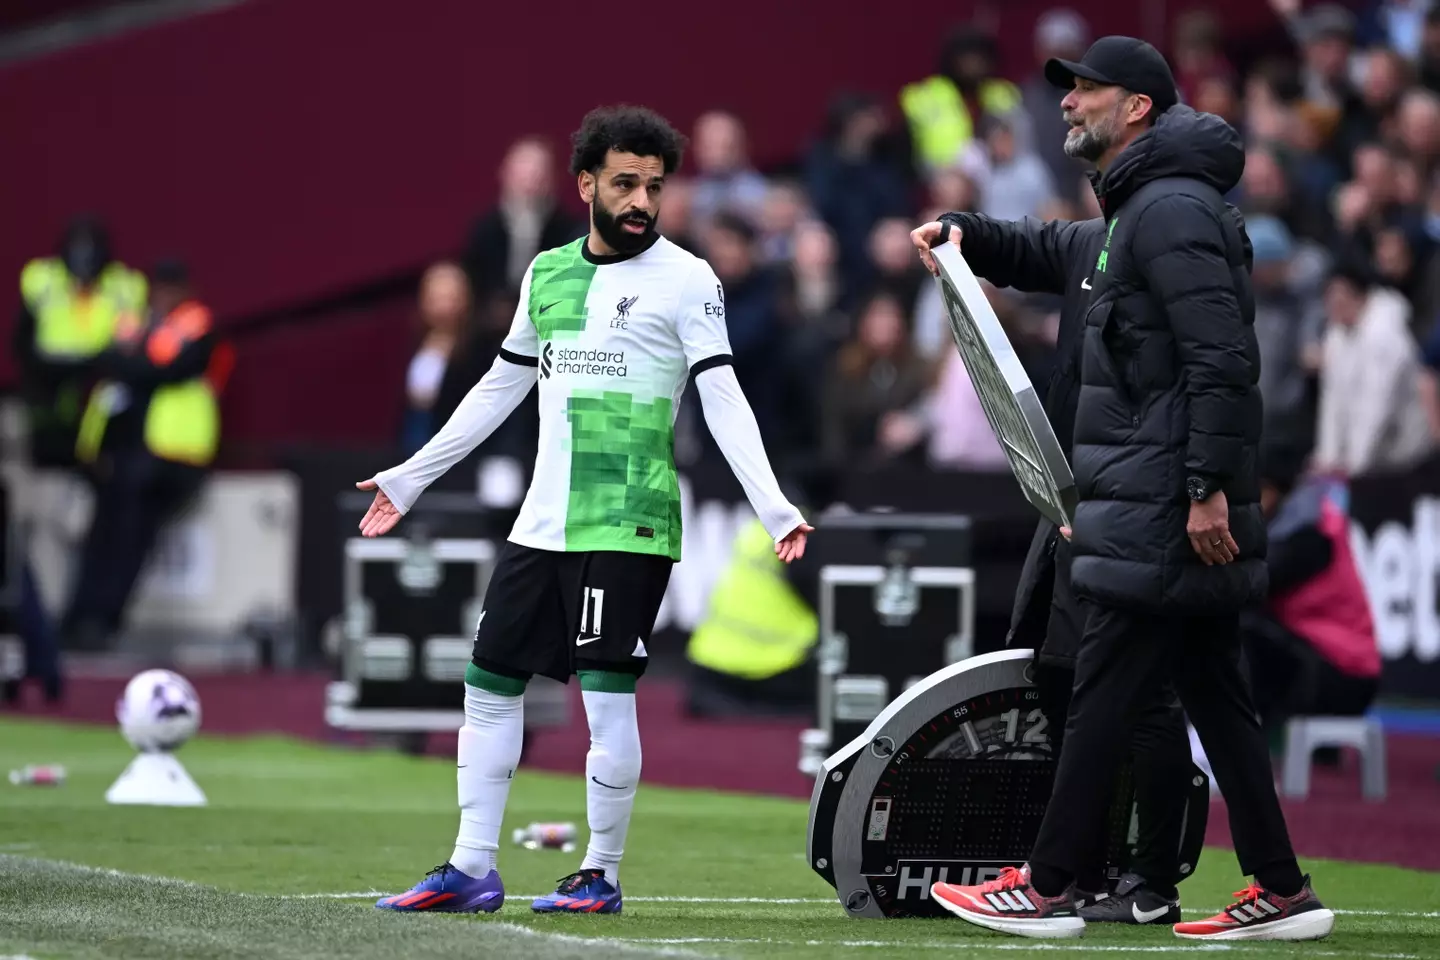 Salah and Klopp clashed during Liverpool's draw with West Ham (Getty)